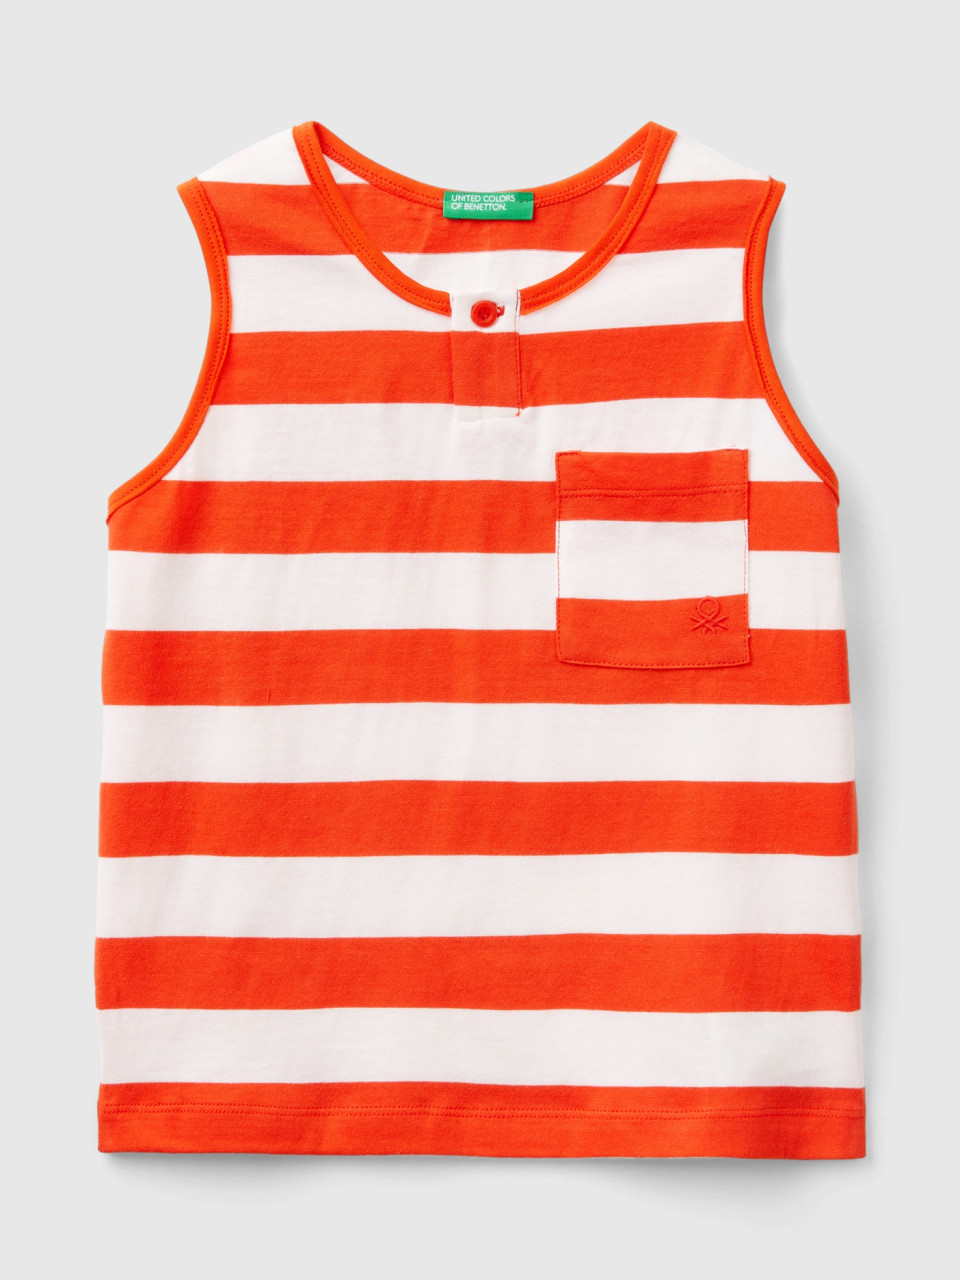 Benetton, Striped Tank Top With Pocket, Multi-color, Kids